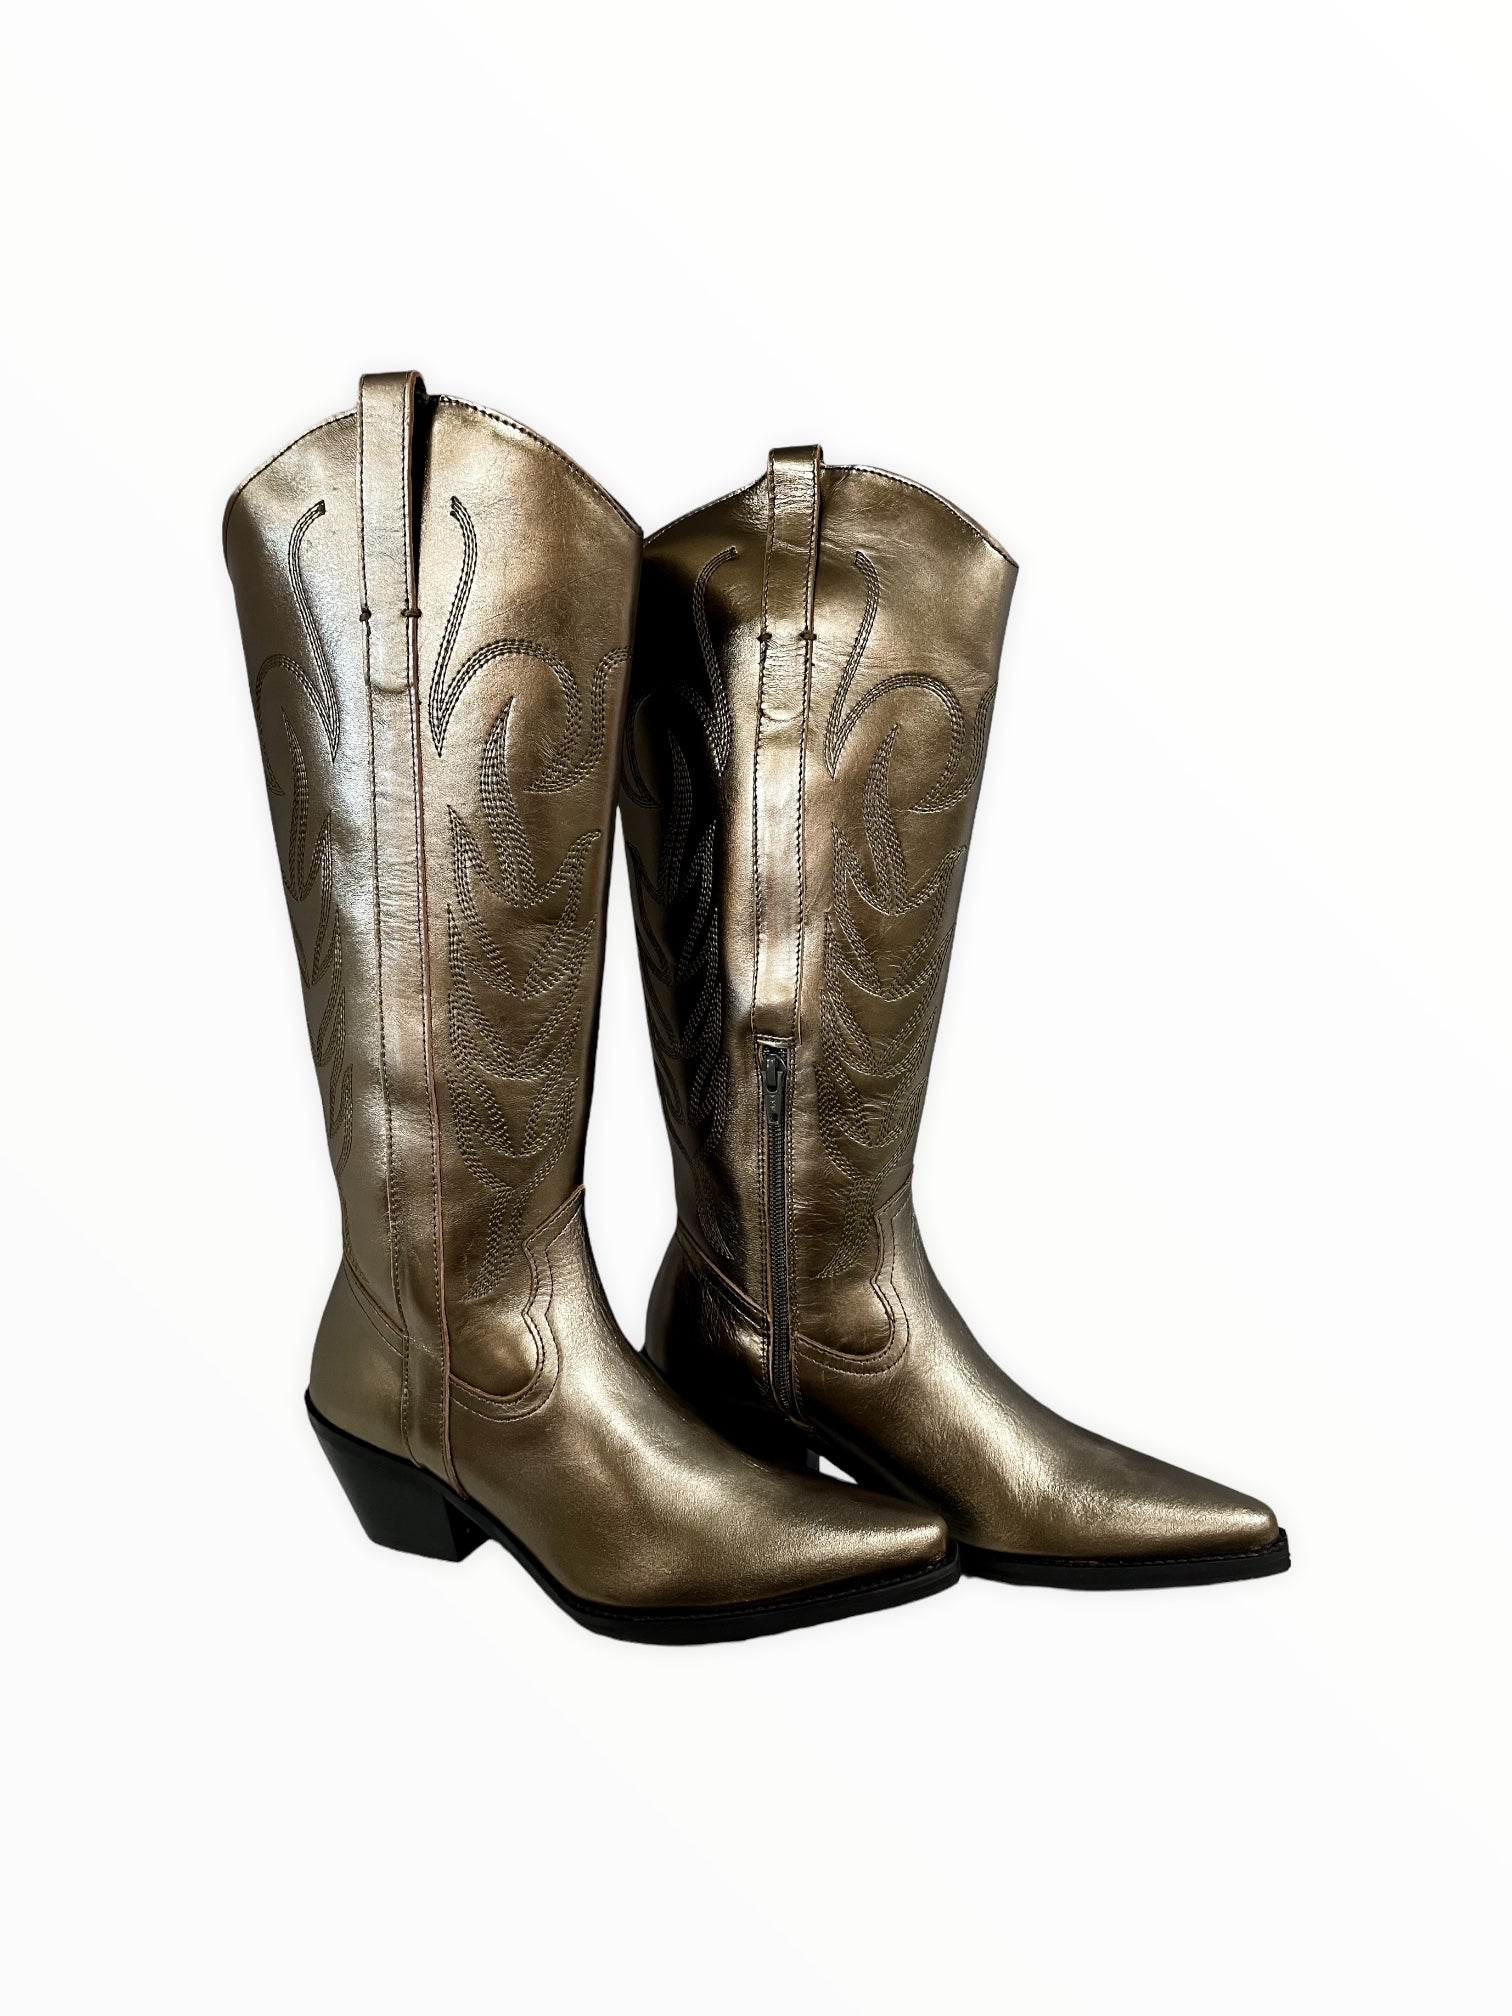 Agency Boots, Pewter